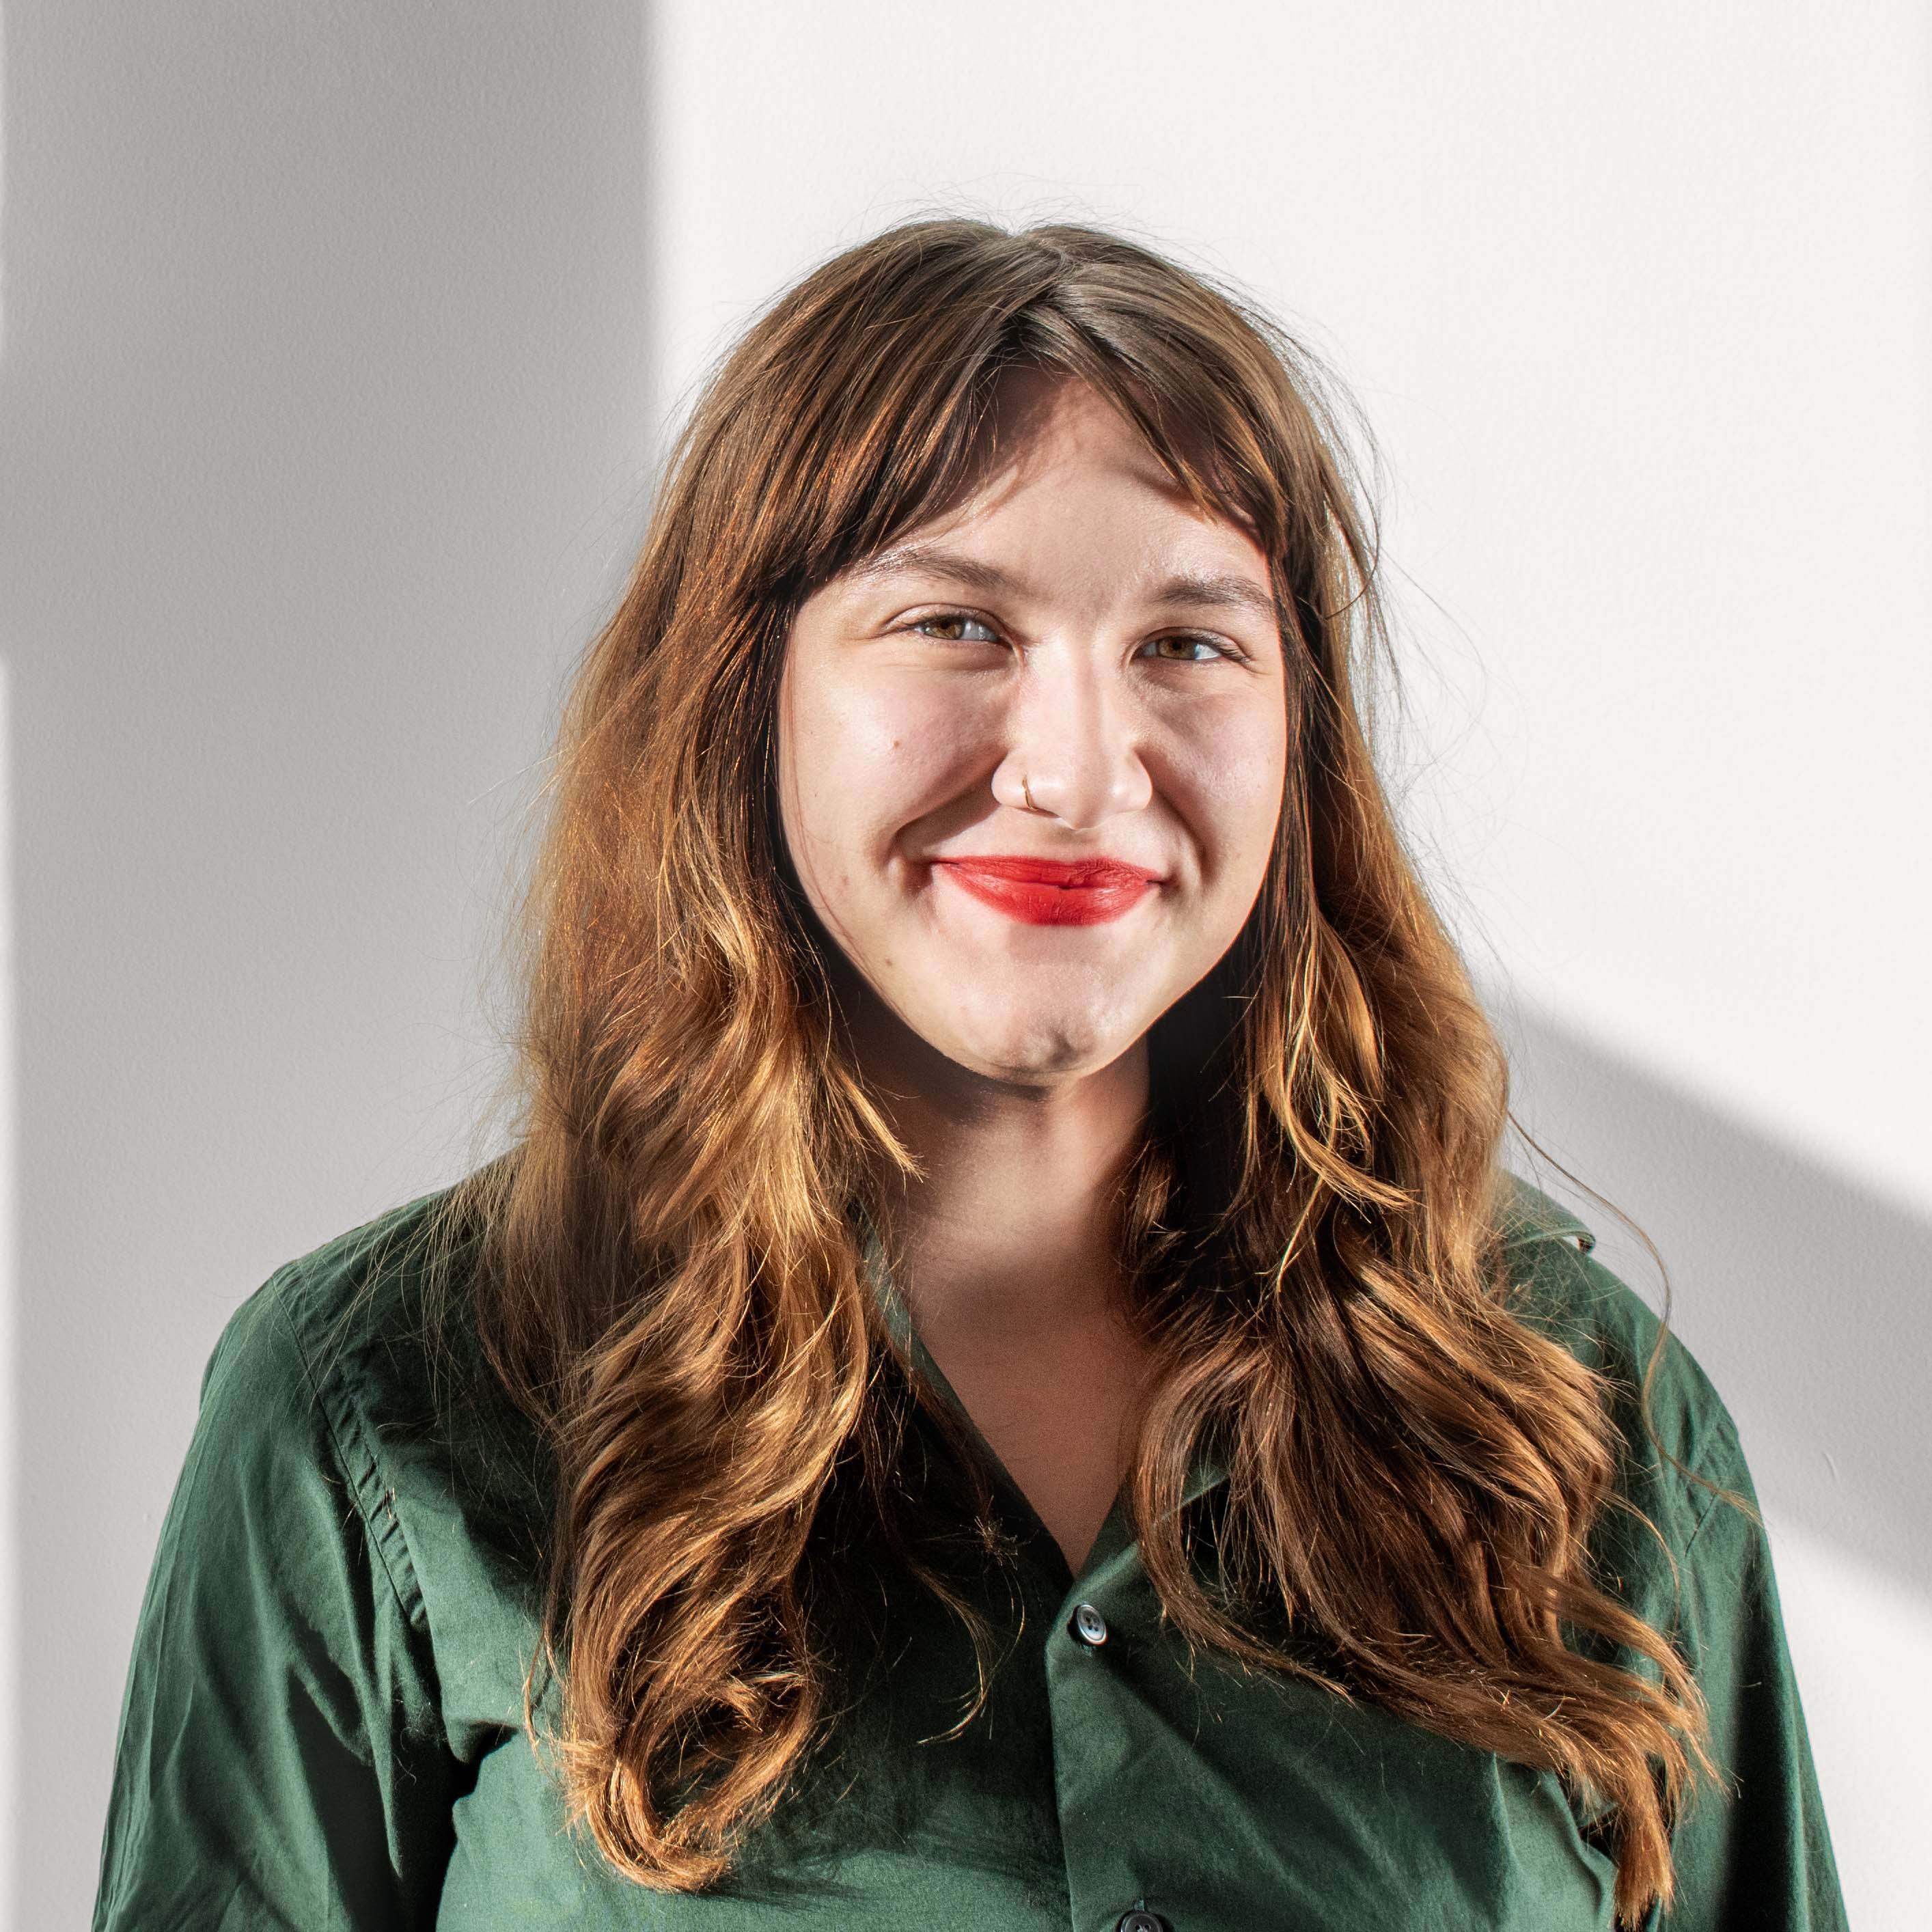 A femme with long, curly, auburn hair and light skin smiles at the camera. Laura wears red lipstick and a green button down shirt.